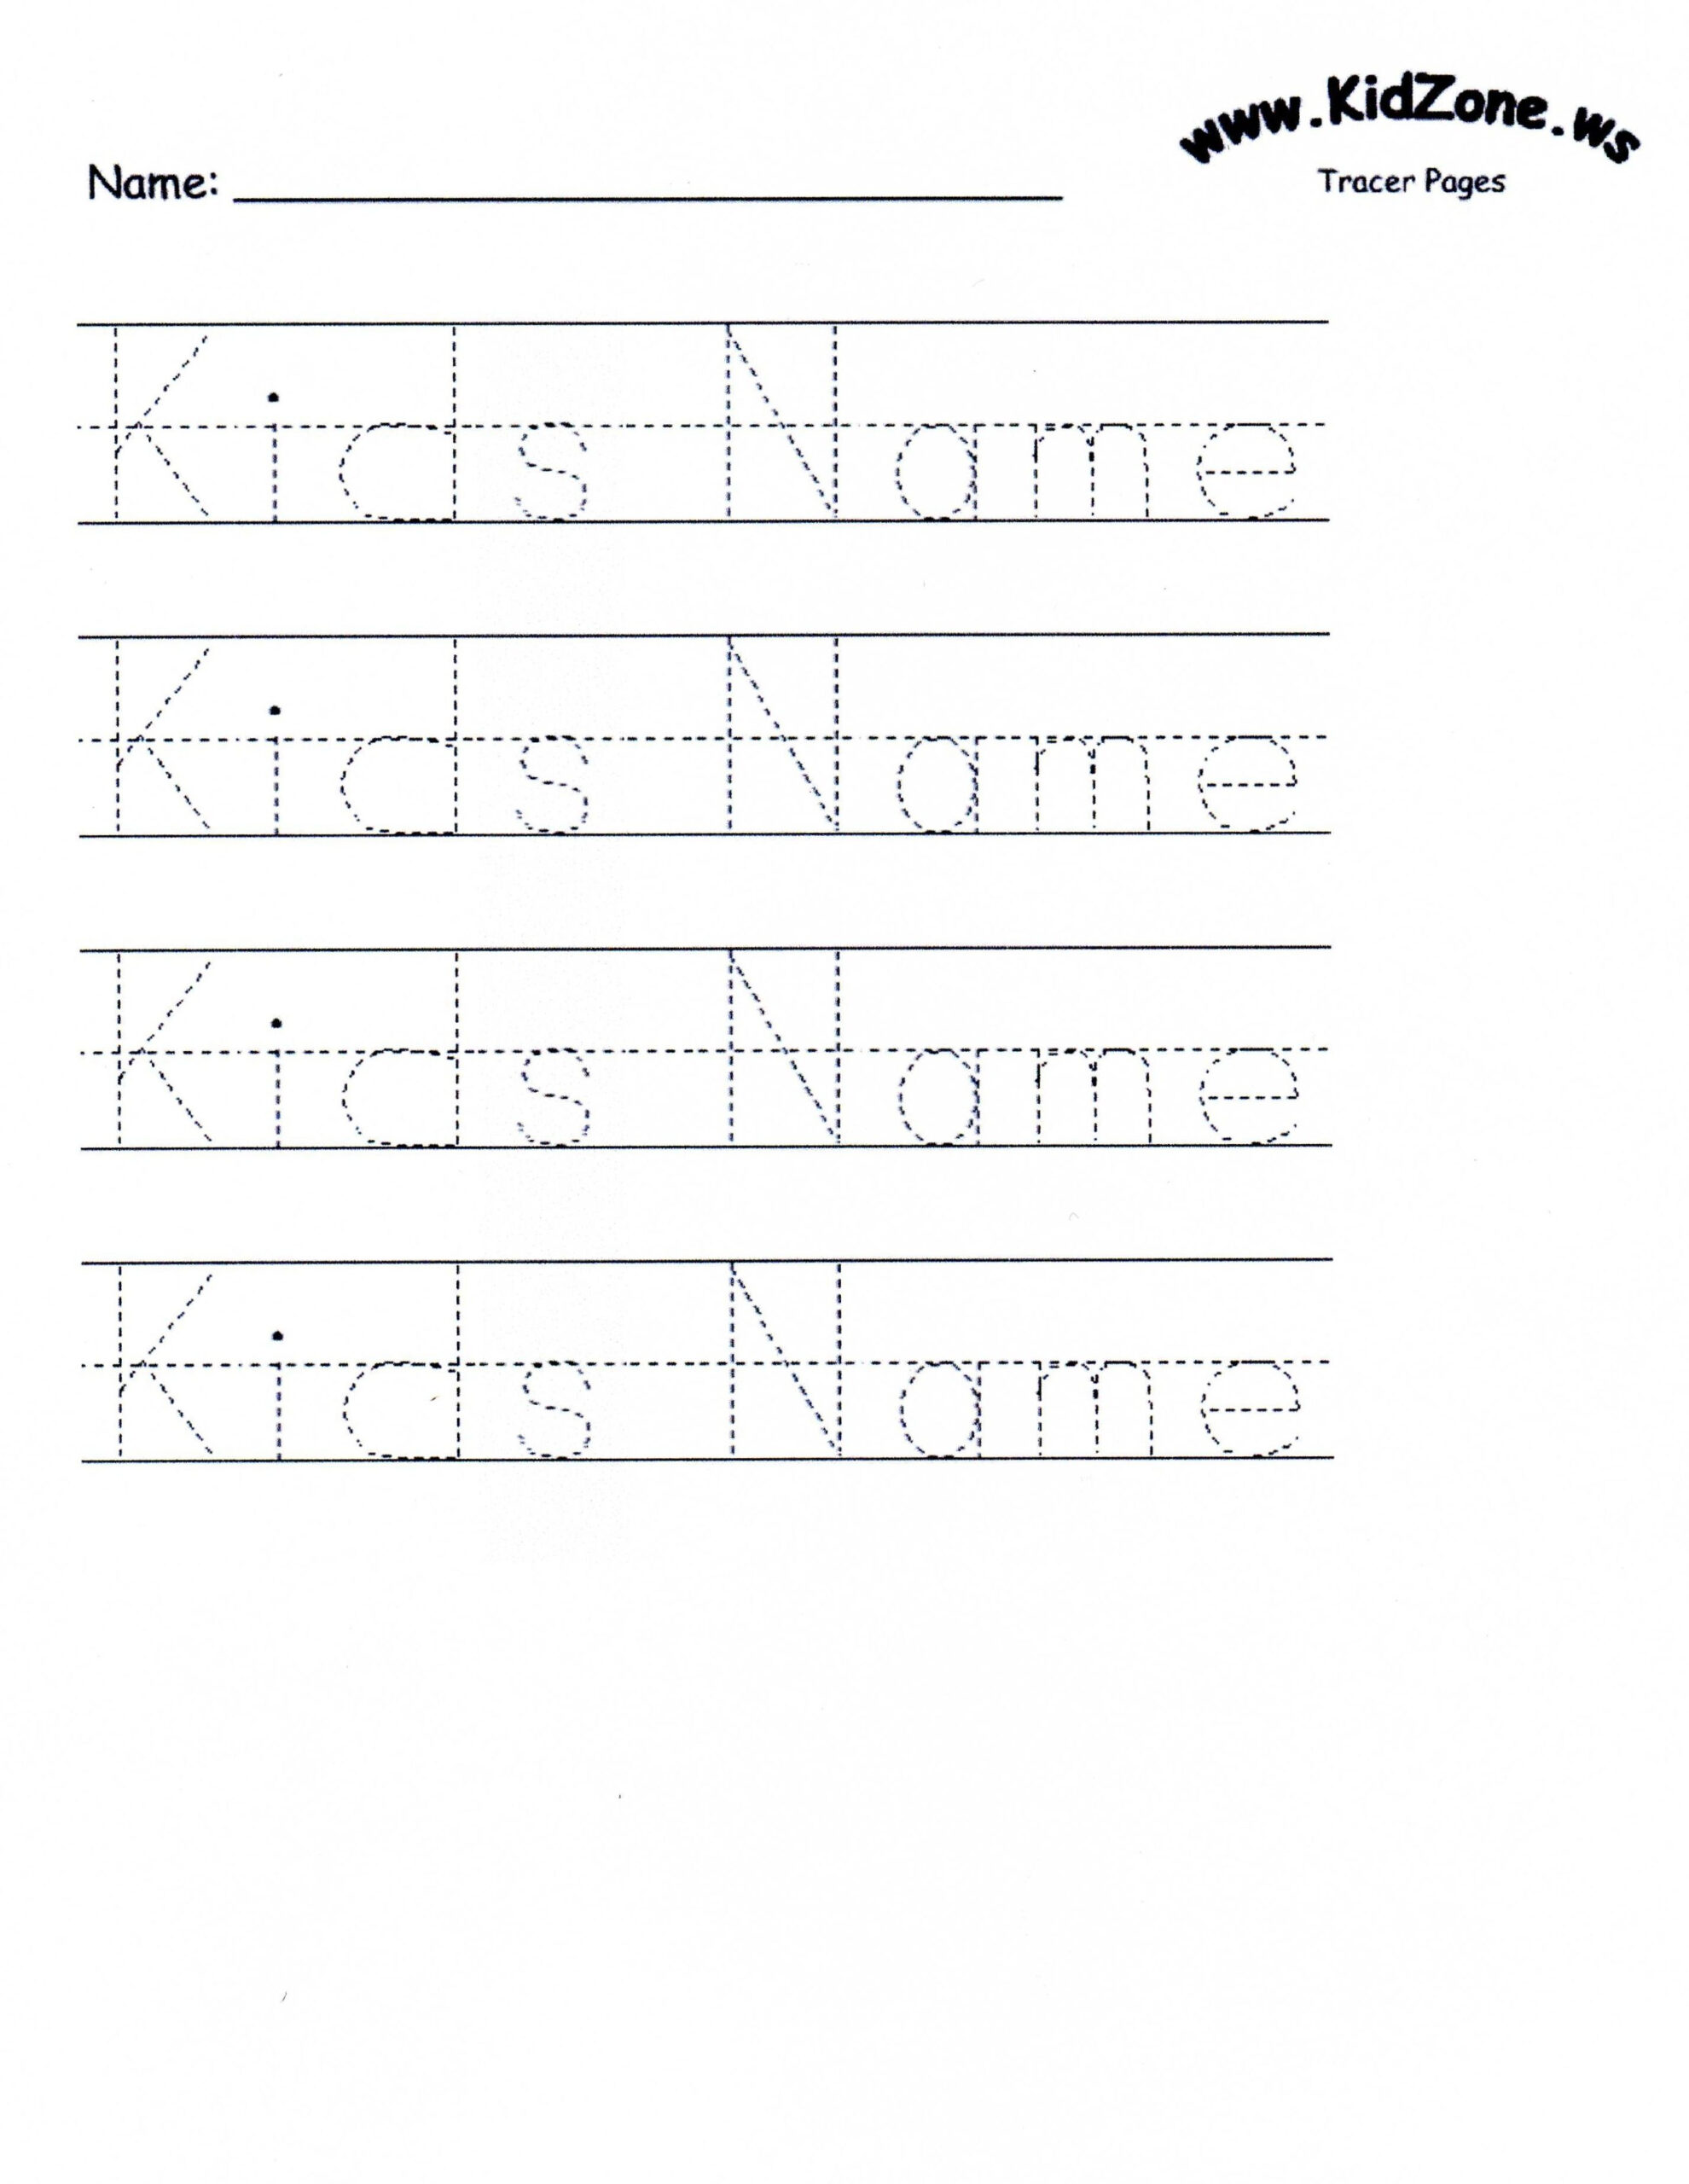 Customizable Printable Letter Pages | Name Tracing regarding Name Tracing For Kindergarten Free